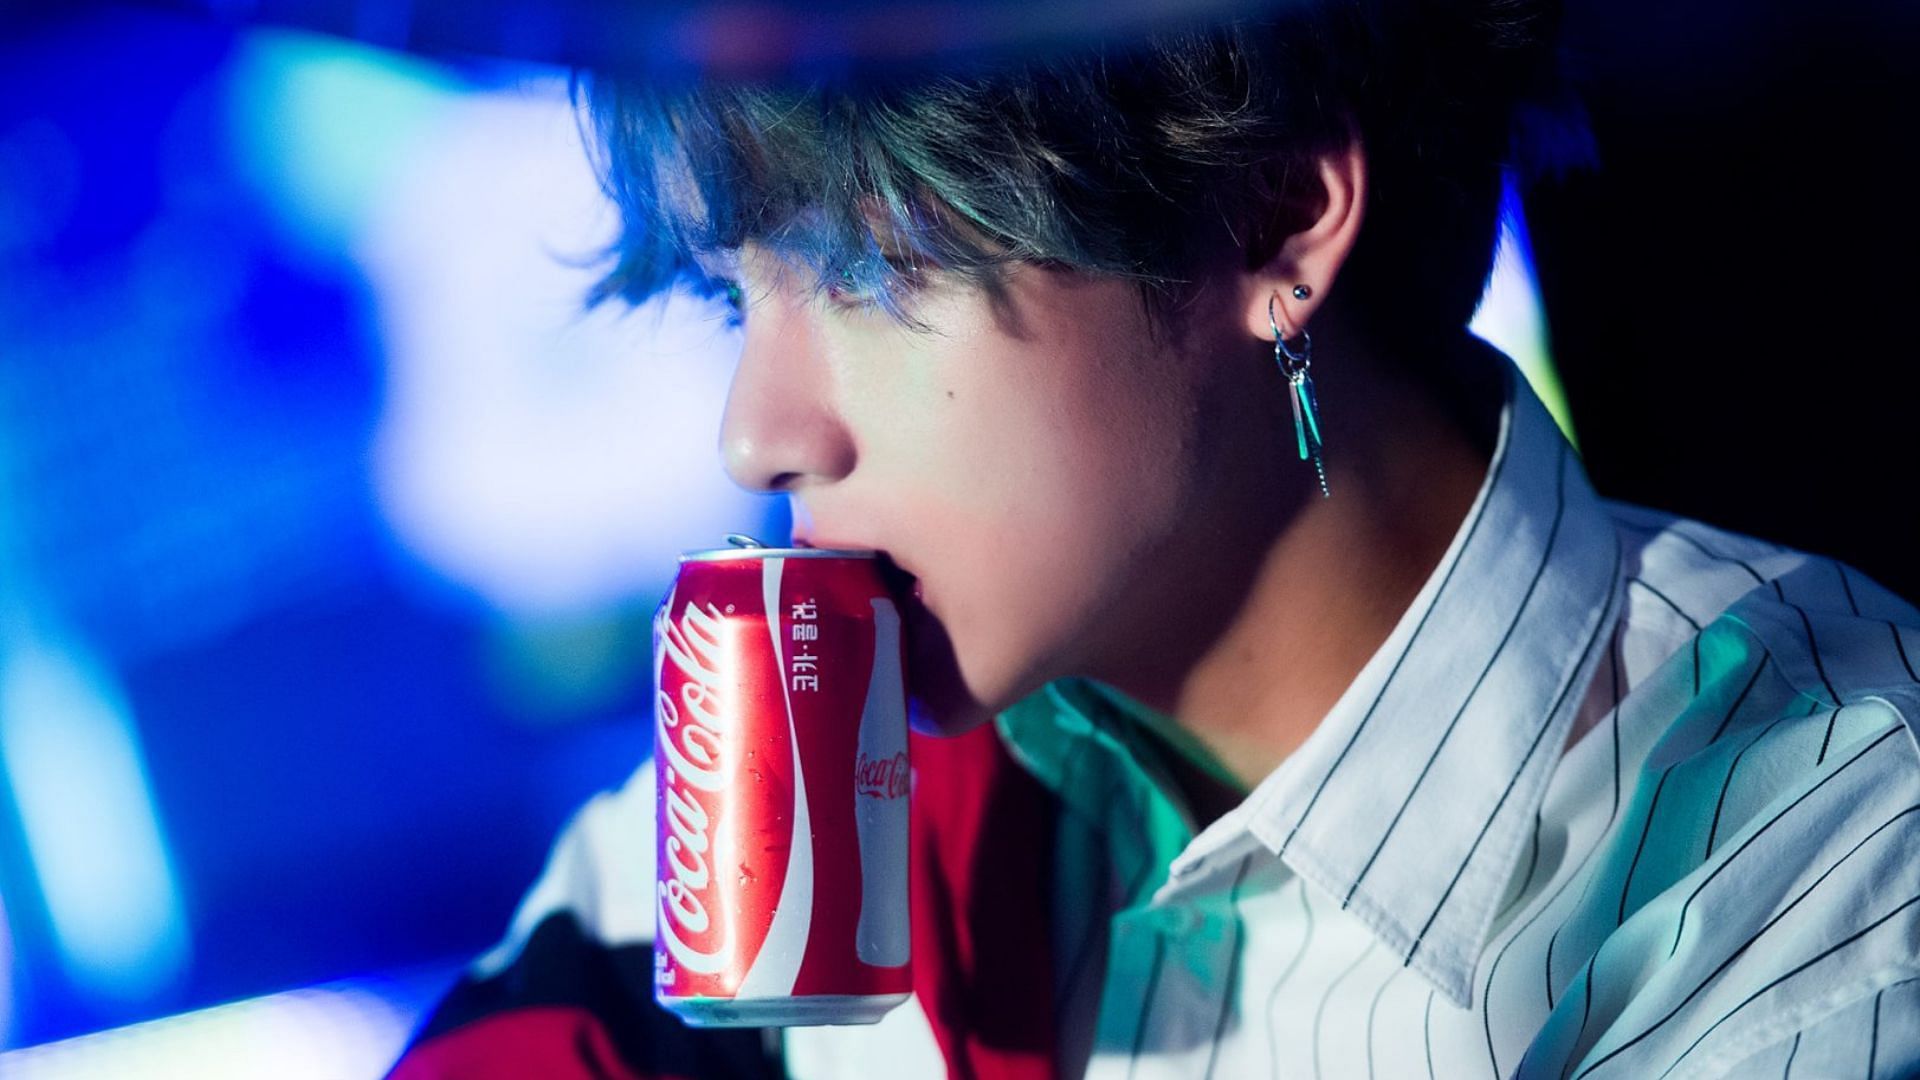 V looking no less than a celestial being for his DNA photoshoot (Image via Dispatch)